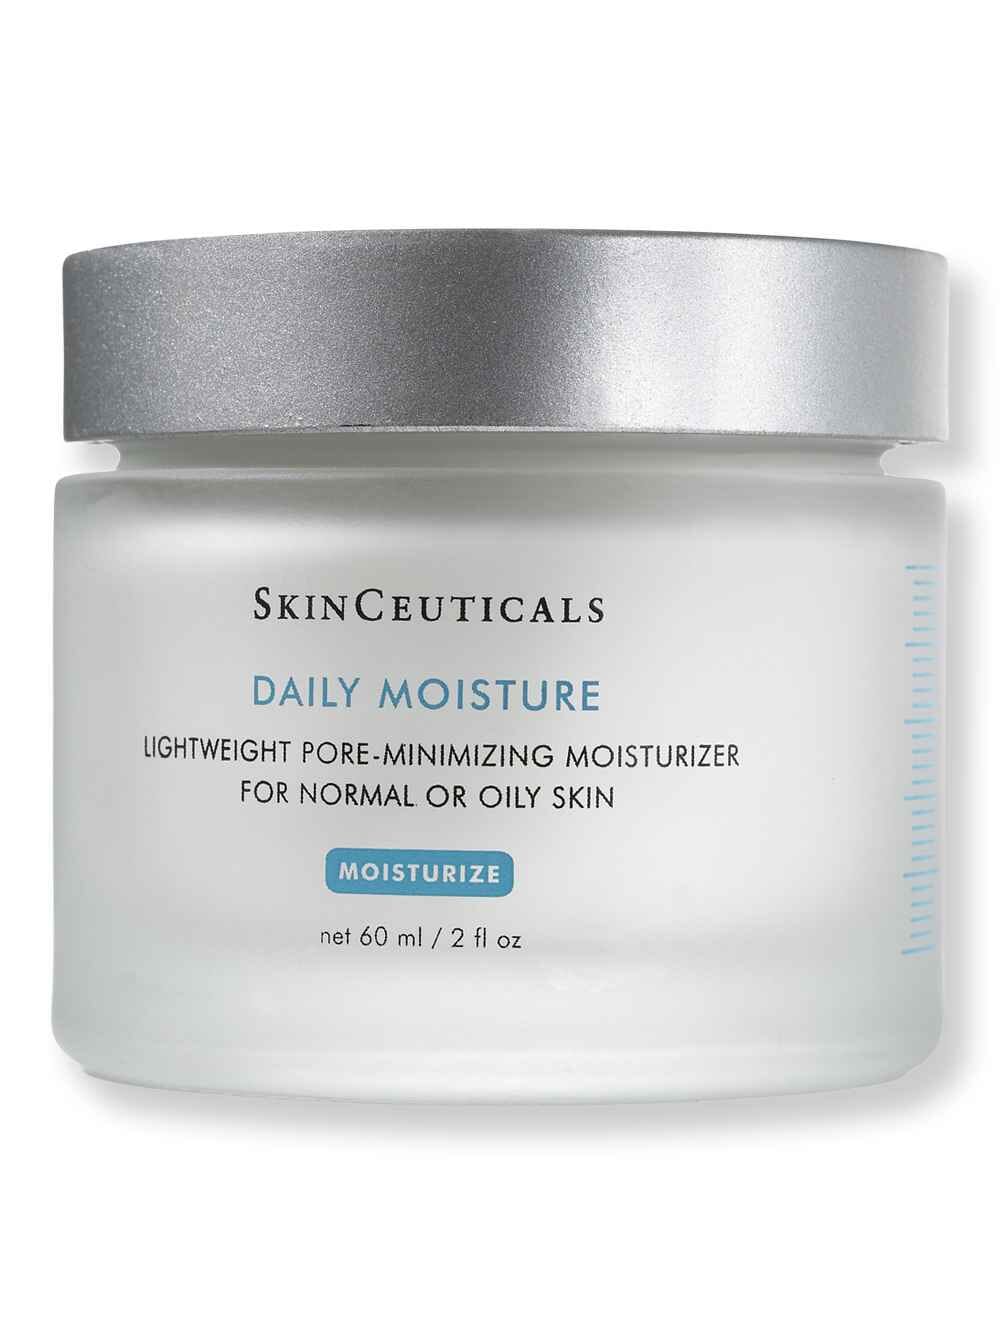 SkinCeuticals SkinCeuticals Daily Moisture 60 ml Face Moisturizers 